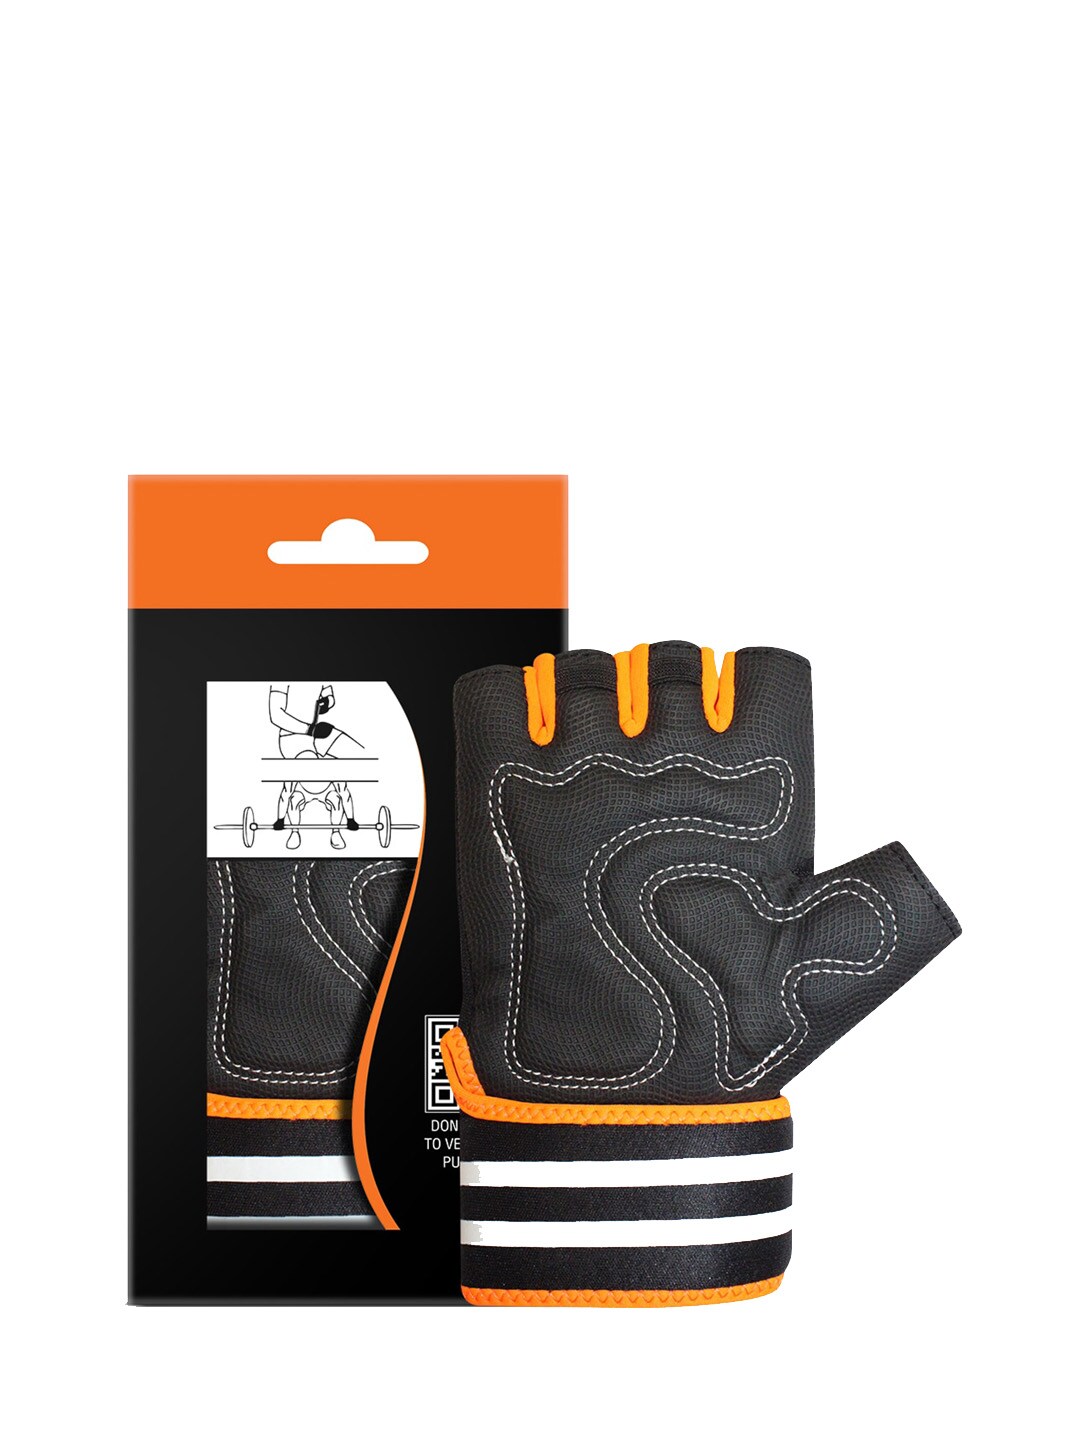 MUSCLEXP Black & Orange Colored Patterned Anti-Slip Gym Gloves Price in India